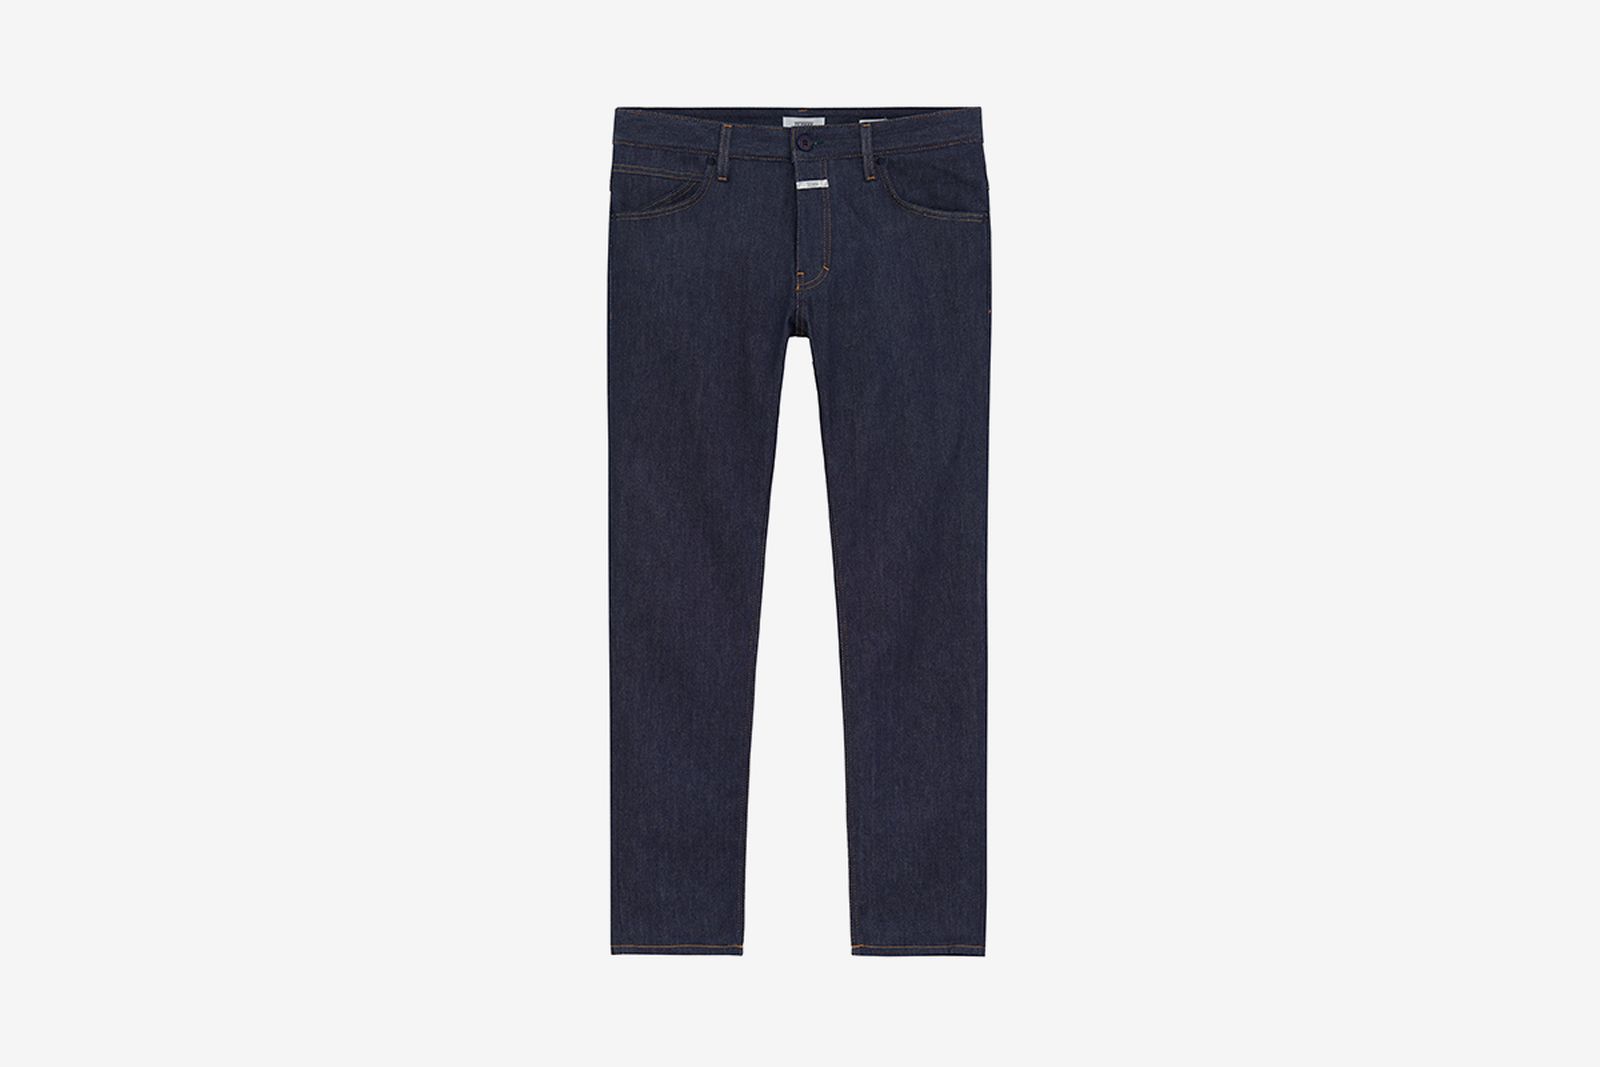 closed-degradable-denim-products-02